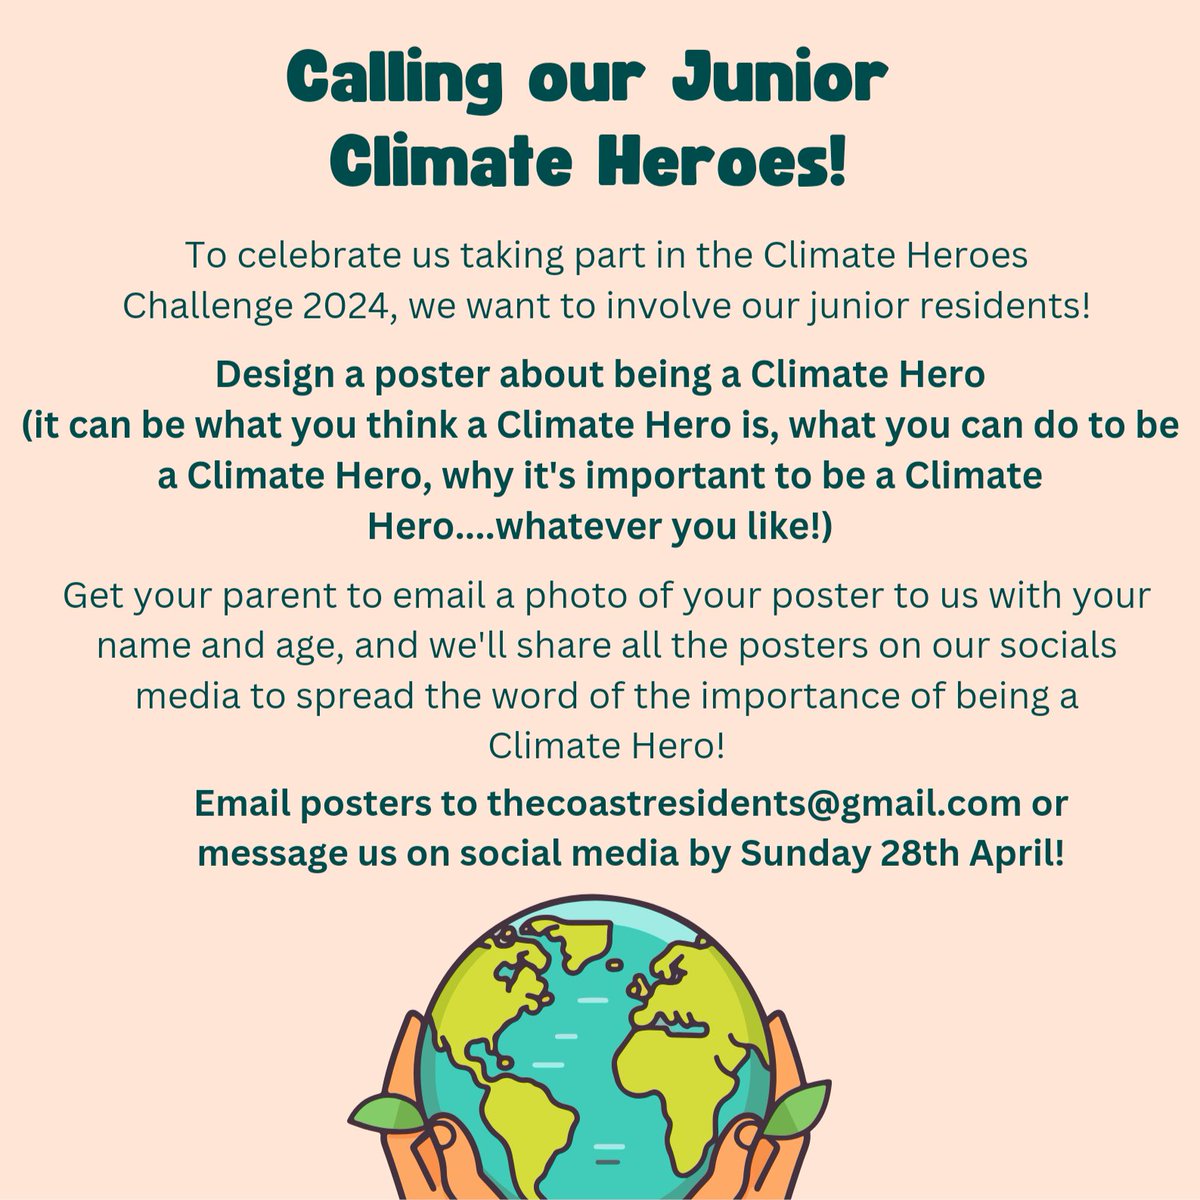 Calling our Junior Climate Heroes! We want to get the whole community involved in this year's challenge so here's how we can get our younger residents involved! 🌍💚